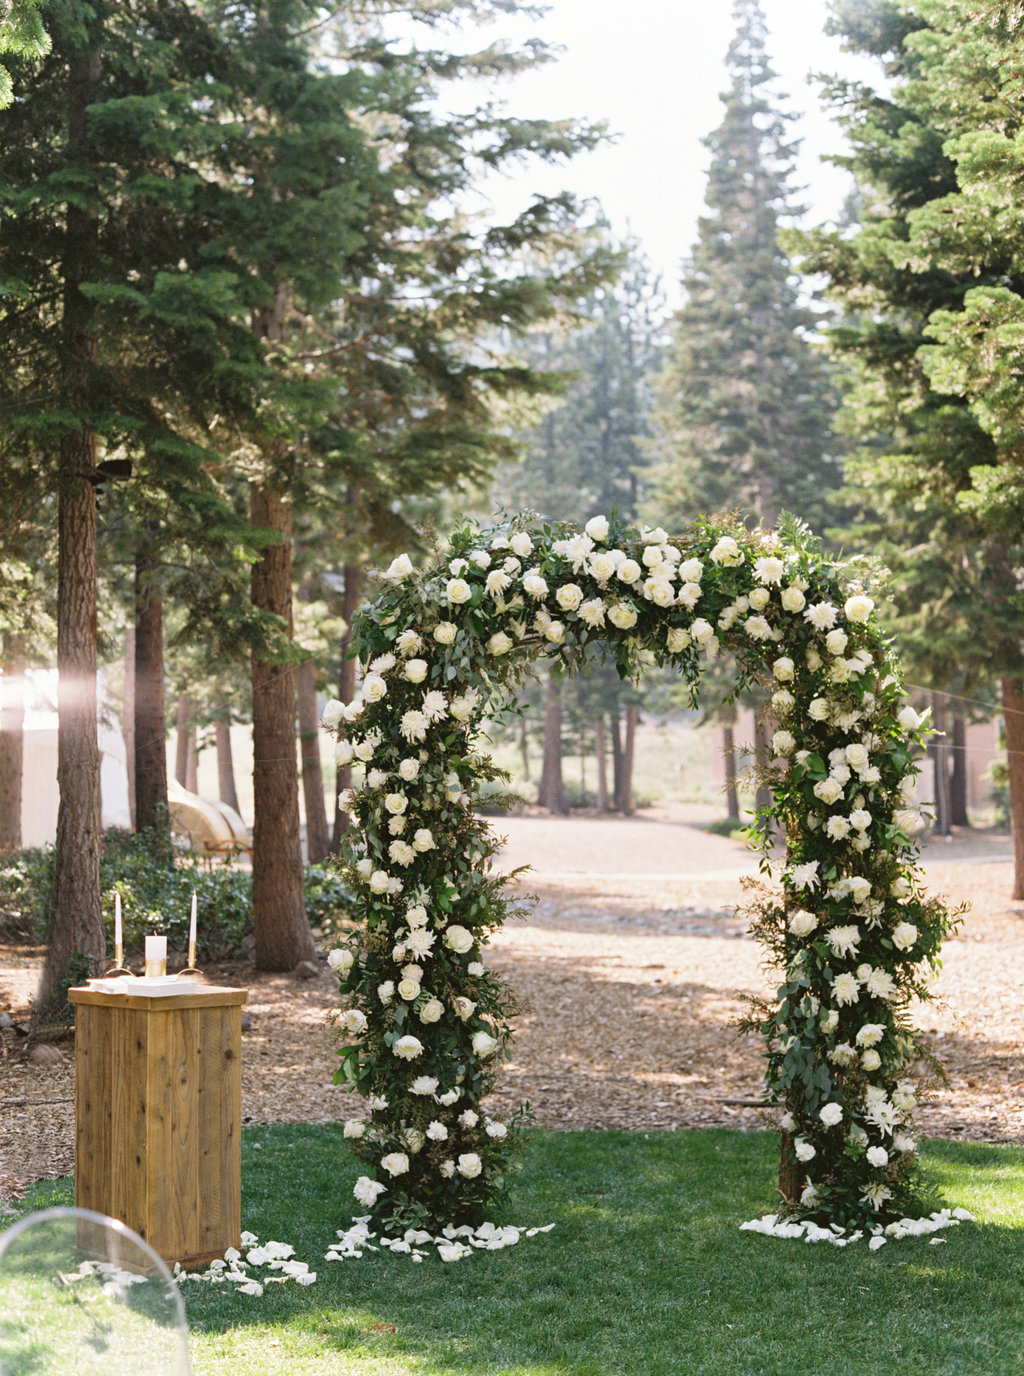 Mexican and Indian Cultures Blended at This Wedding in Lake Tahoe ...